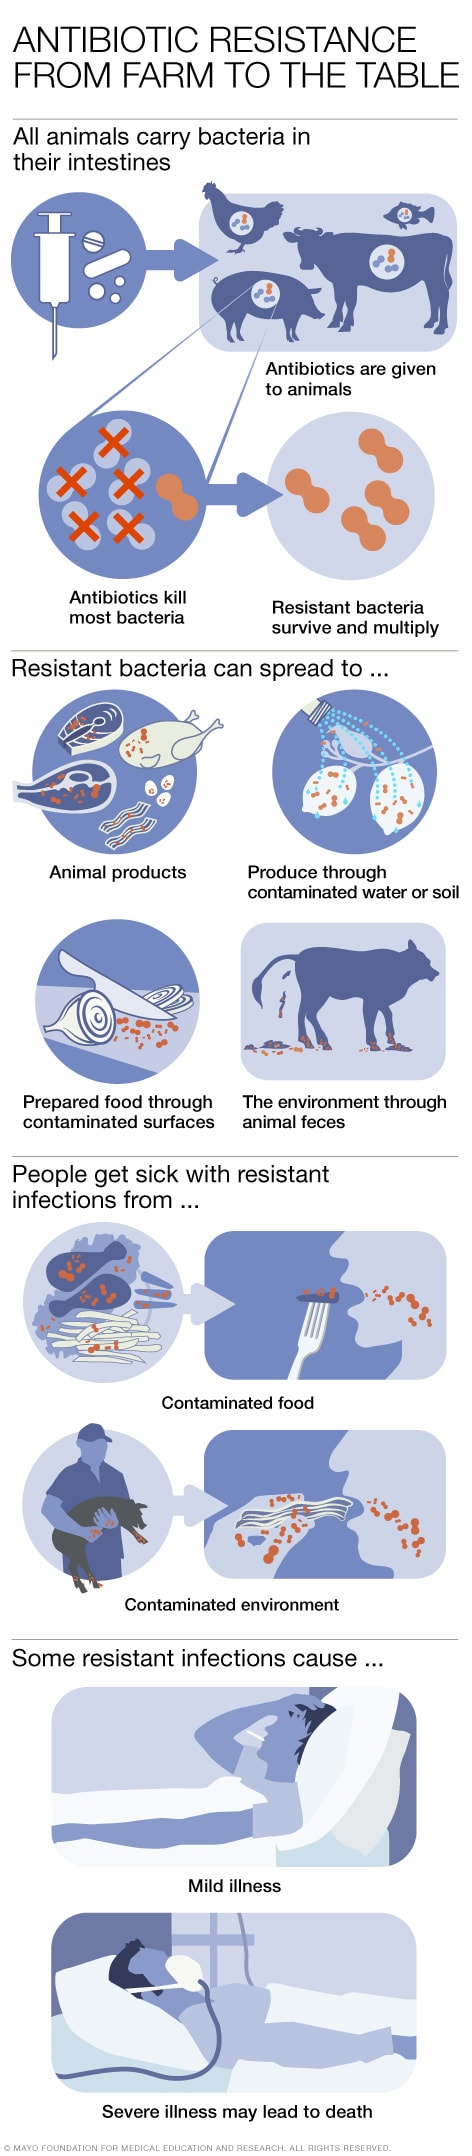 Antibiotic use in agriculture - Mayo Clinic